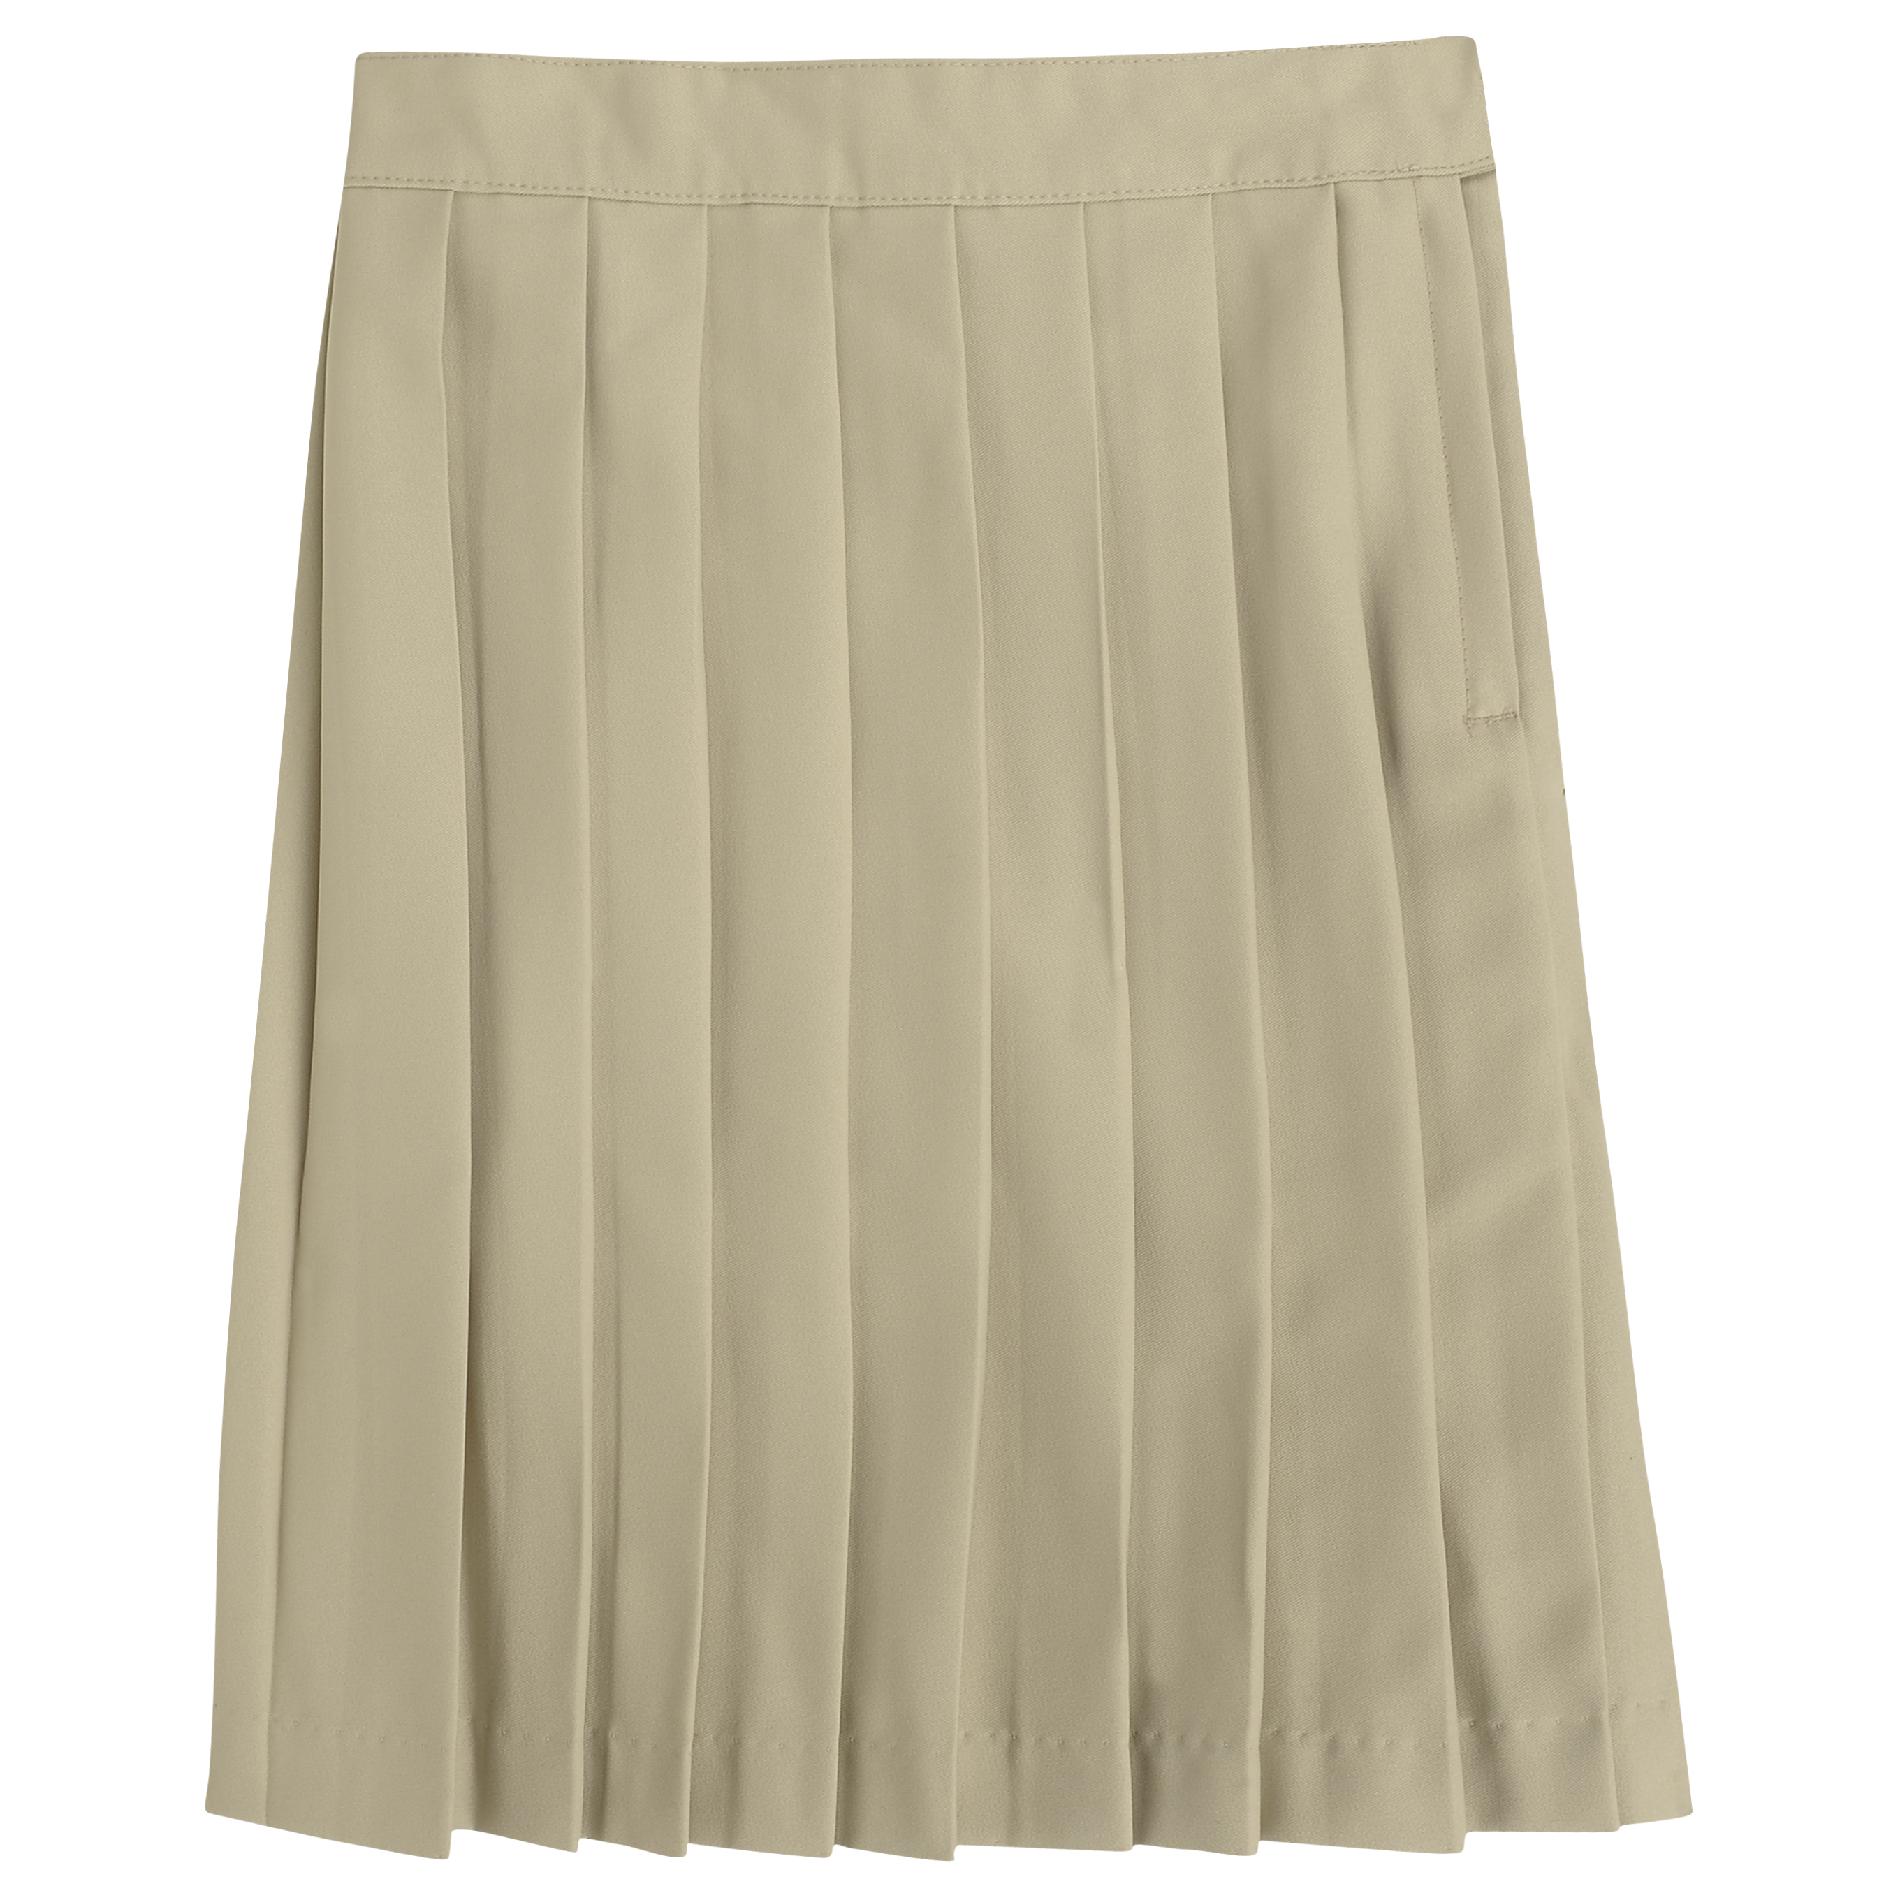 At School by French Toast Juniors Pleated Skirt